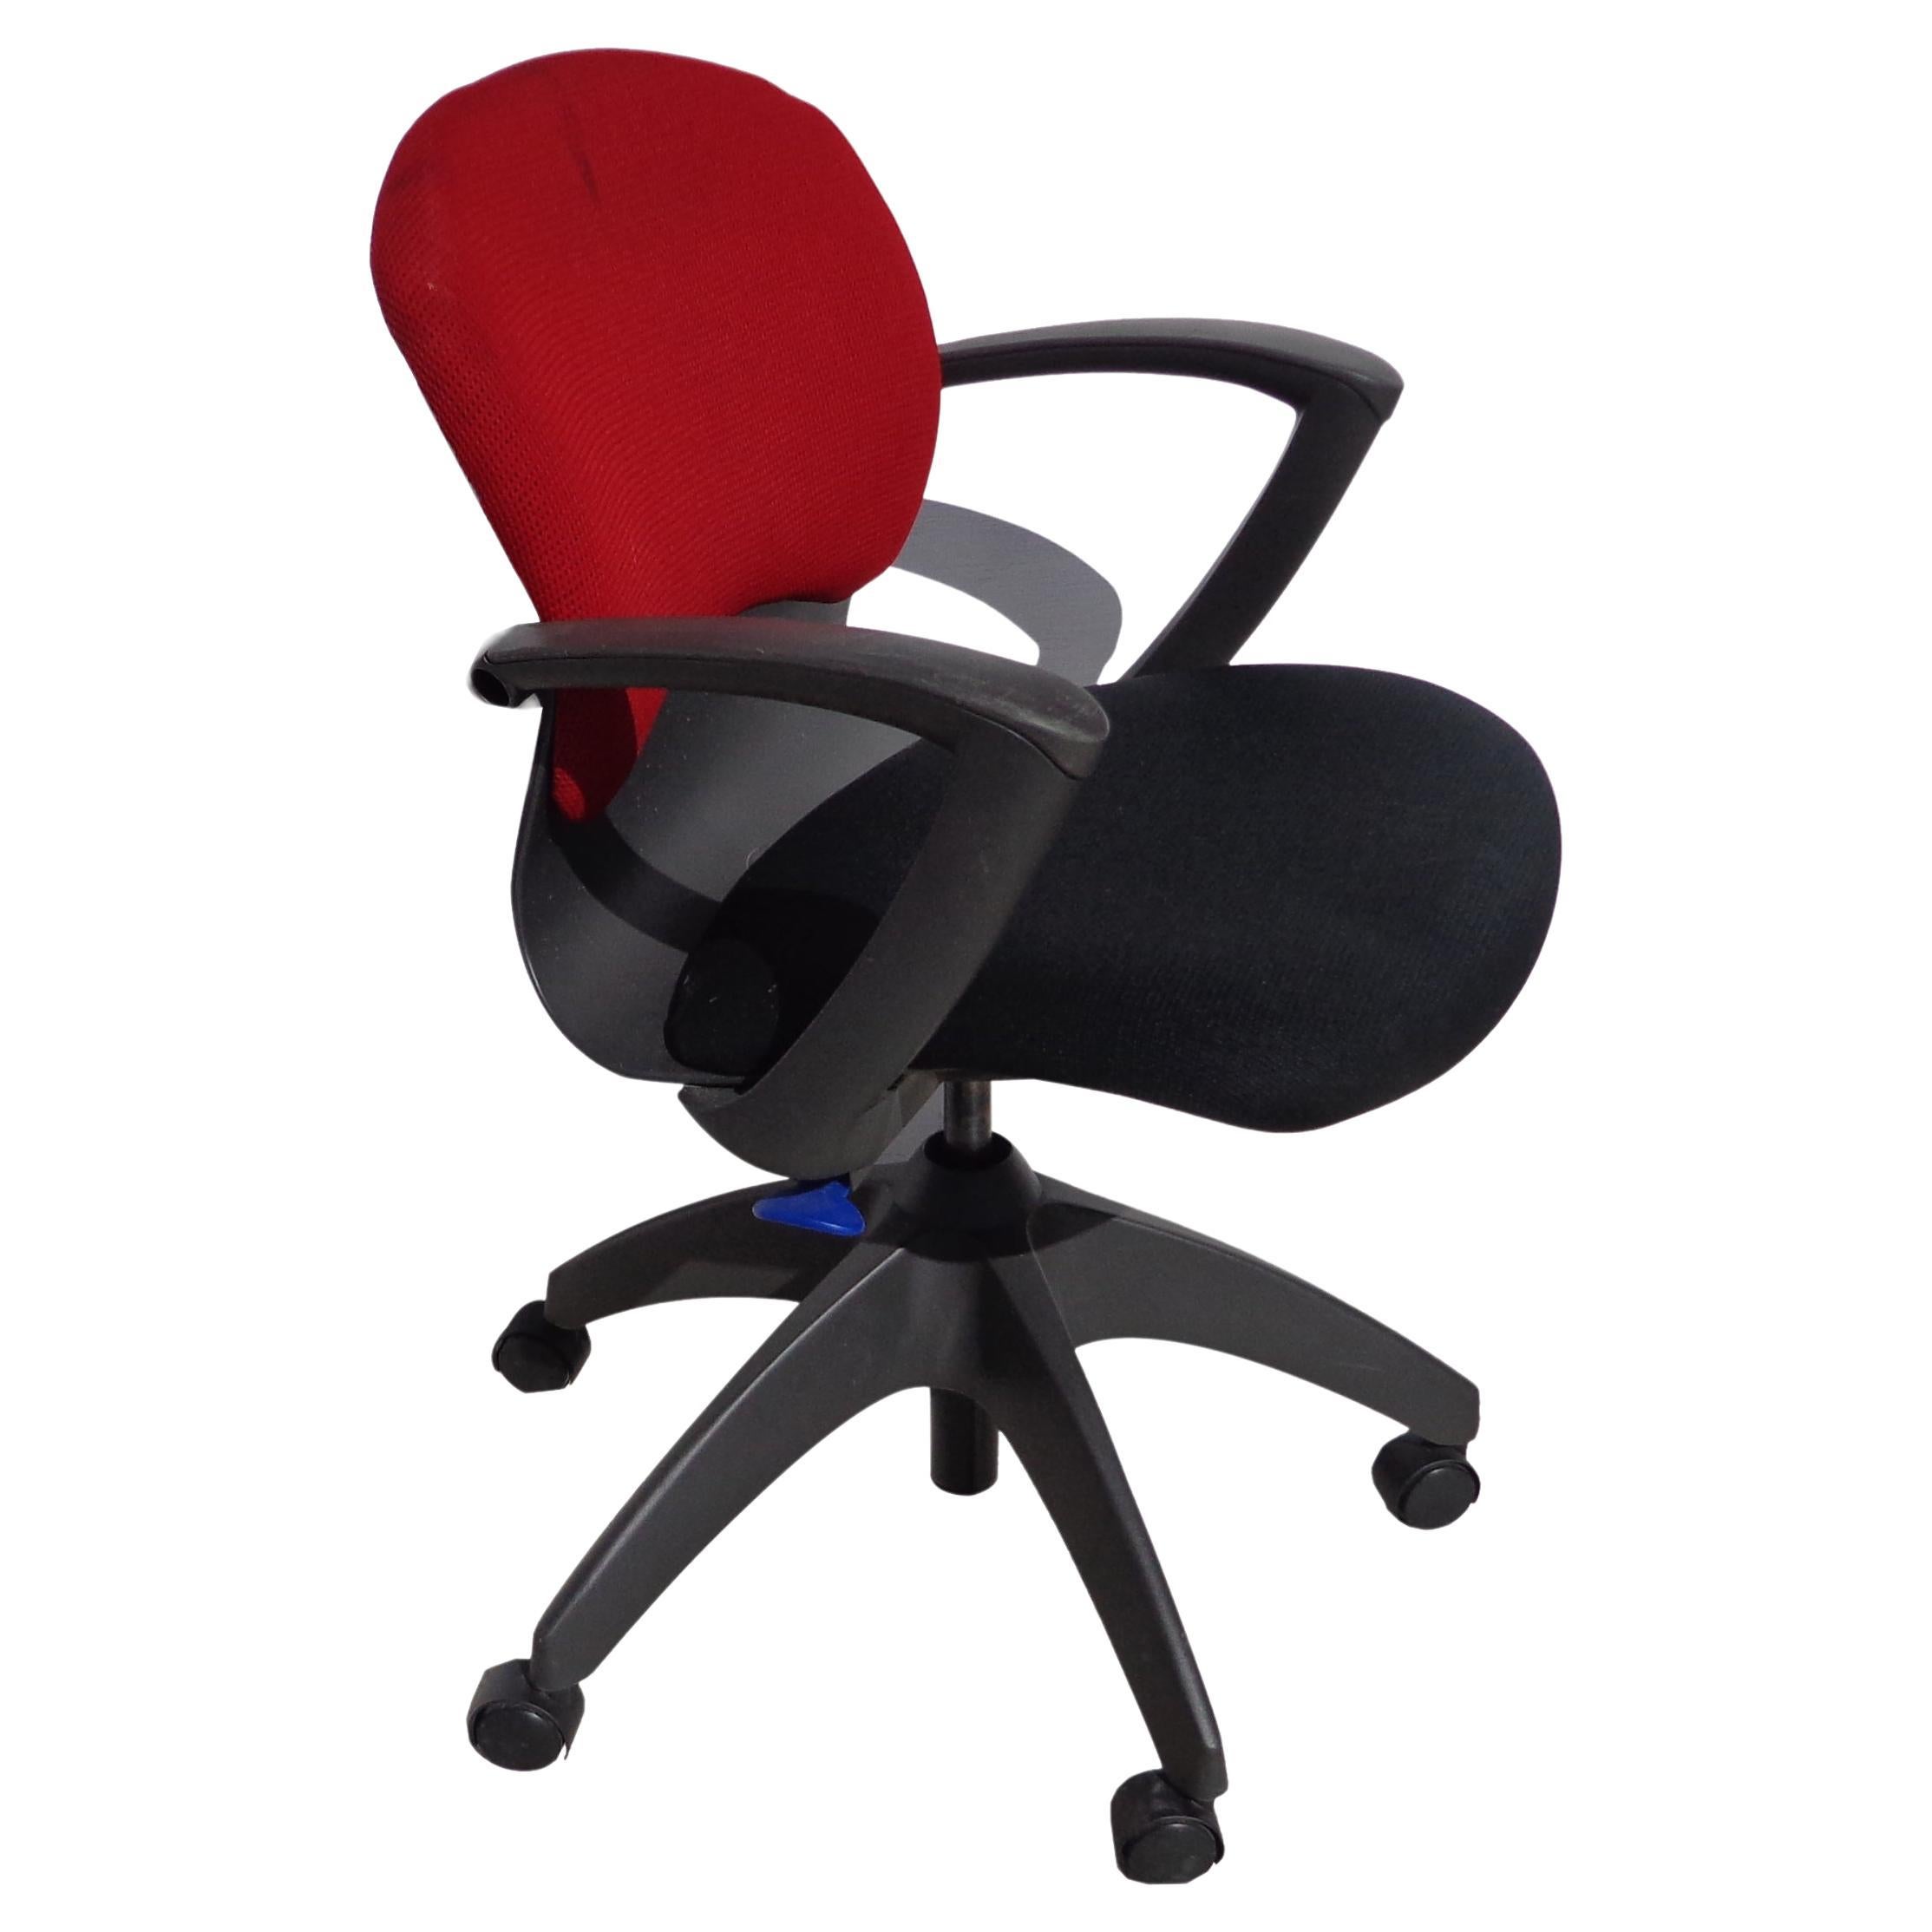 1 SOHO Task Chair by Roberto Lucci & Paolo Orlandini for Knoll